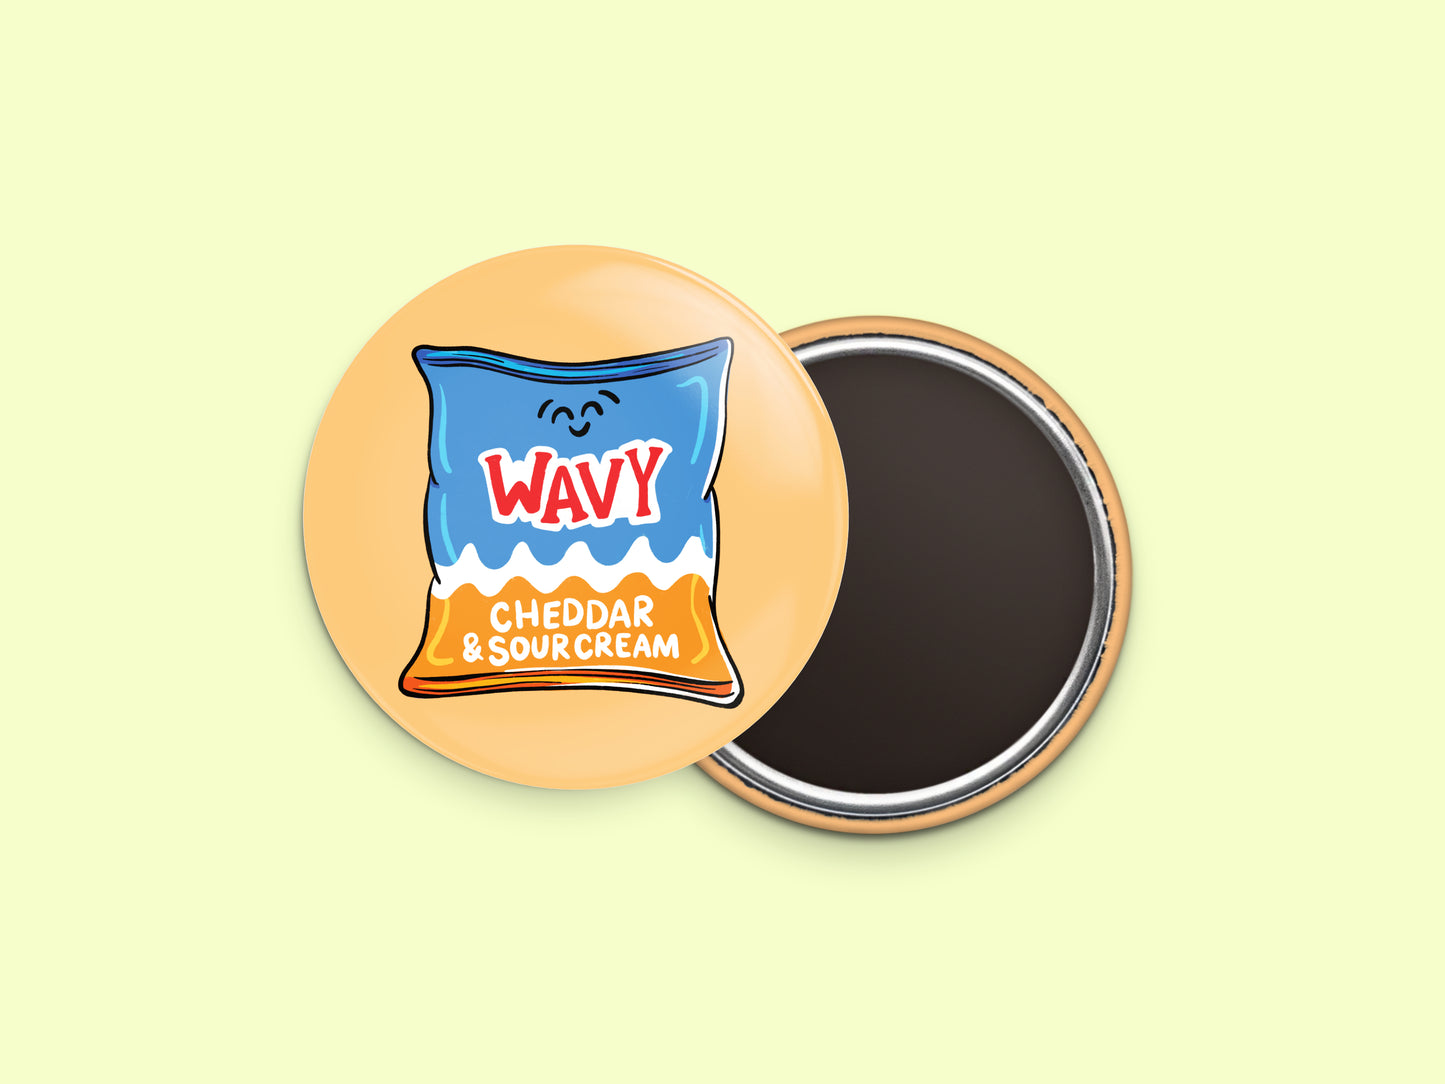 Cheddar and Sour Cream Wavy Chips Button Fridge Magnet